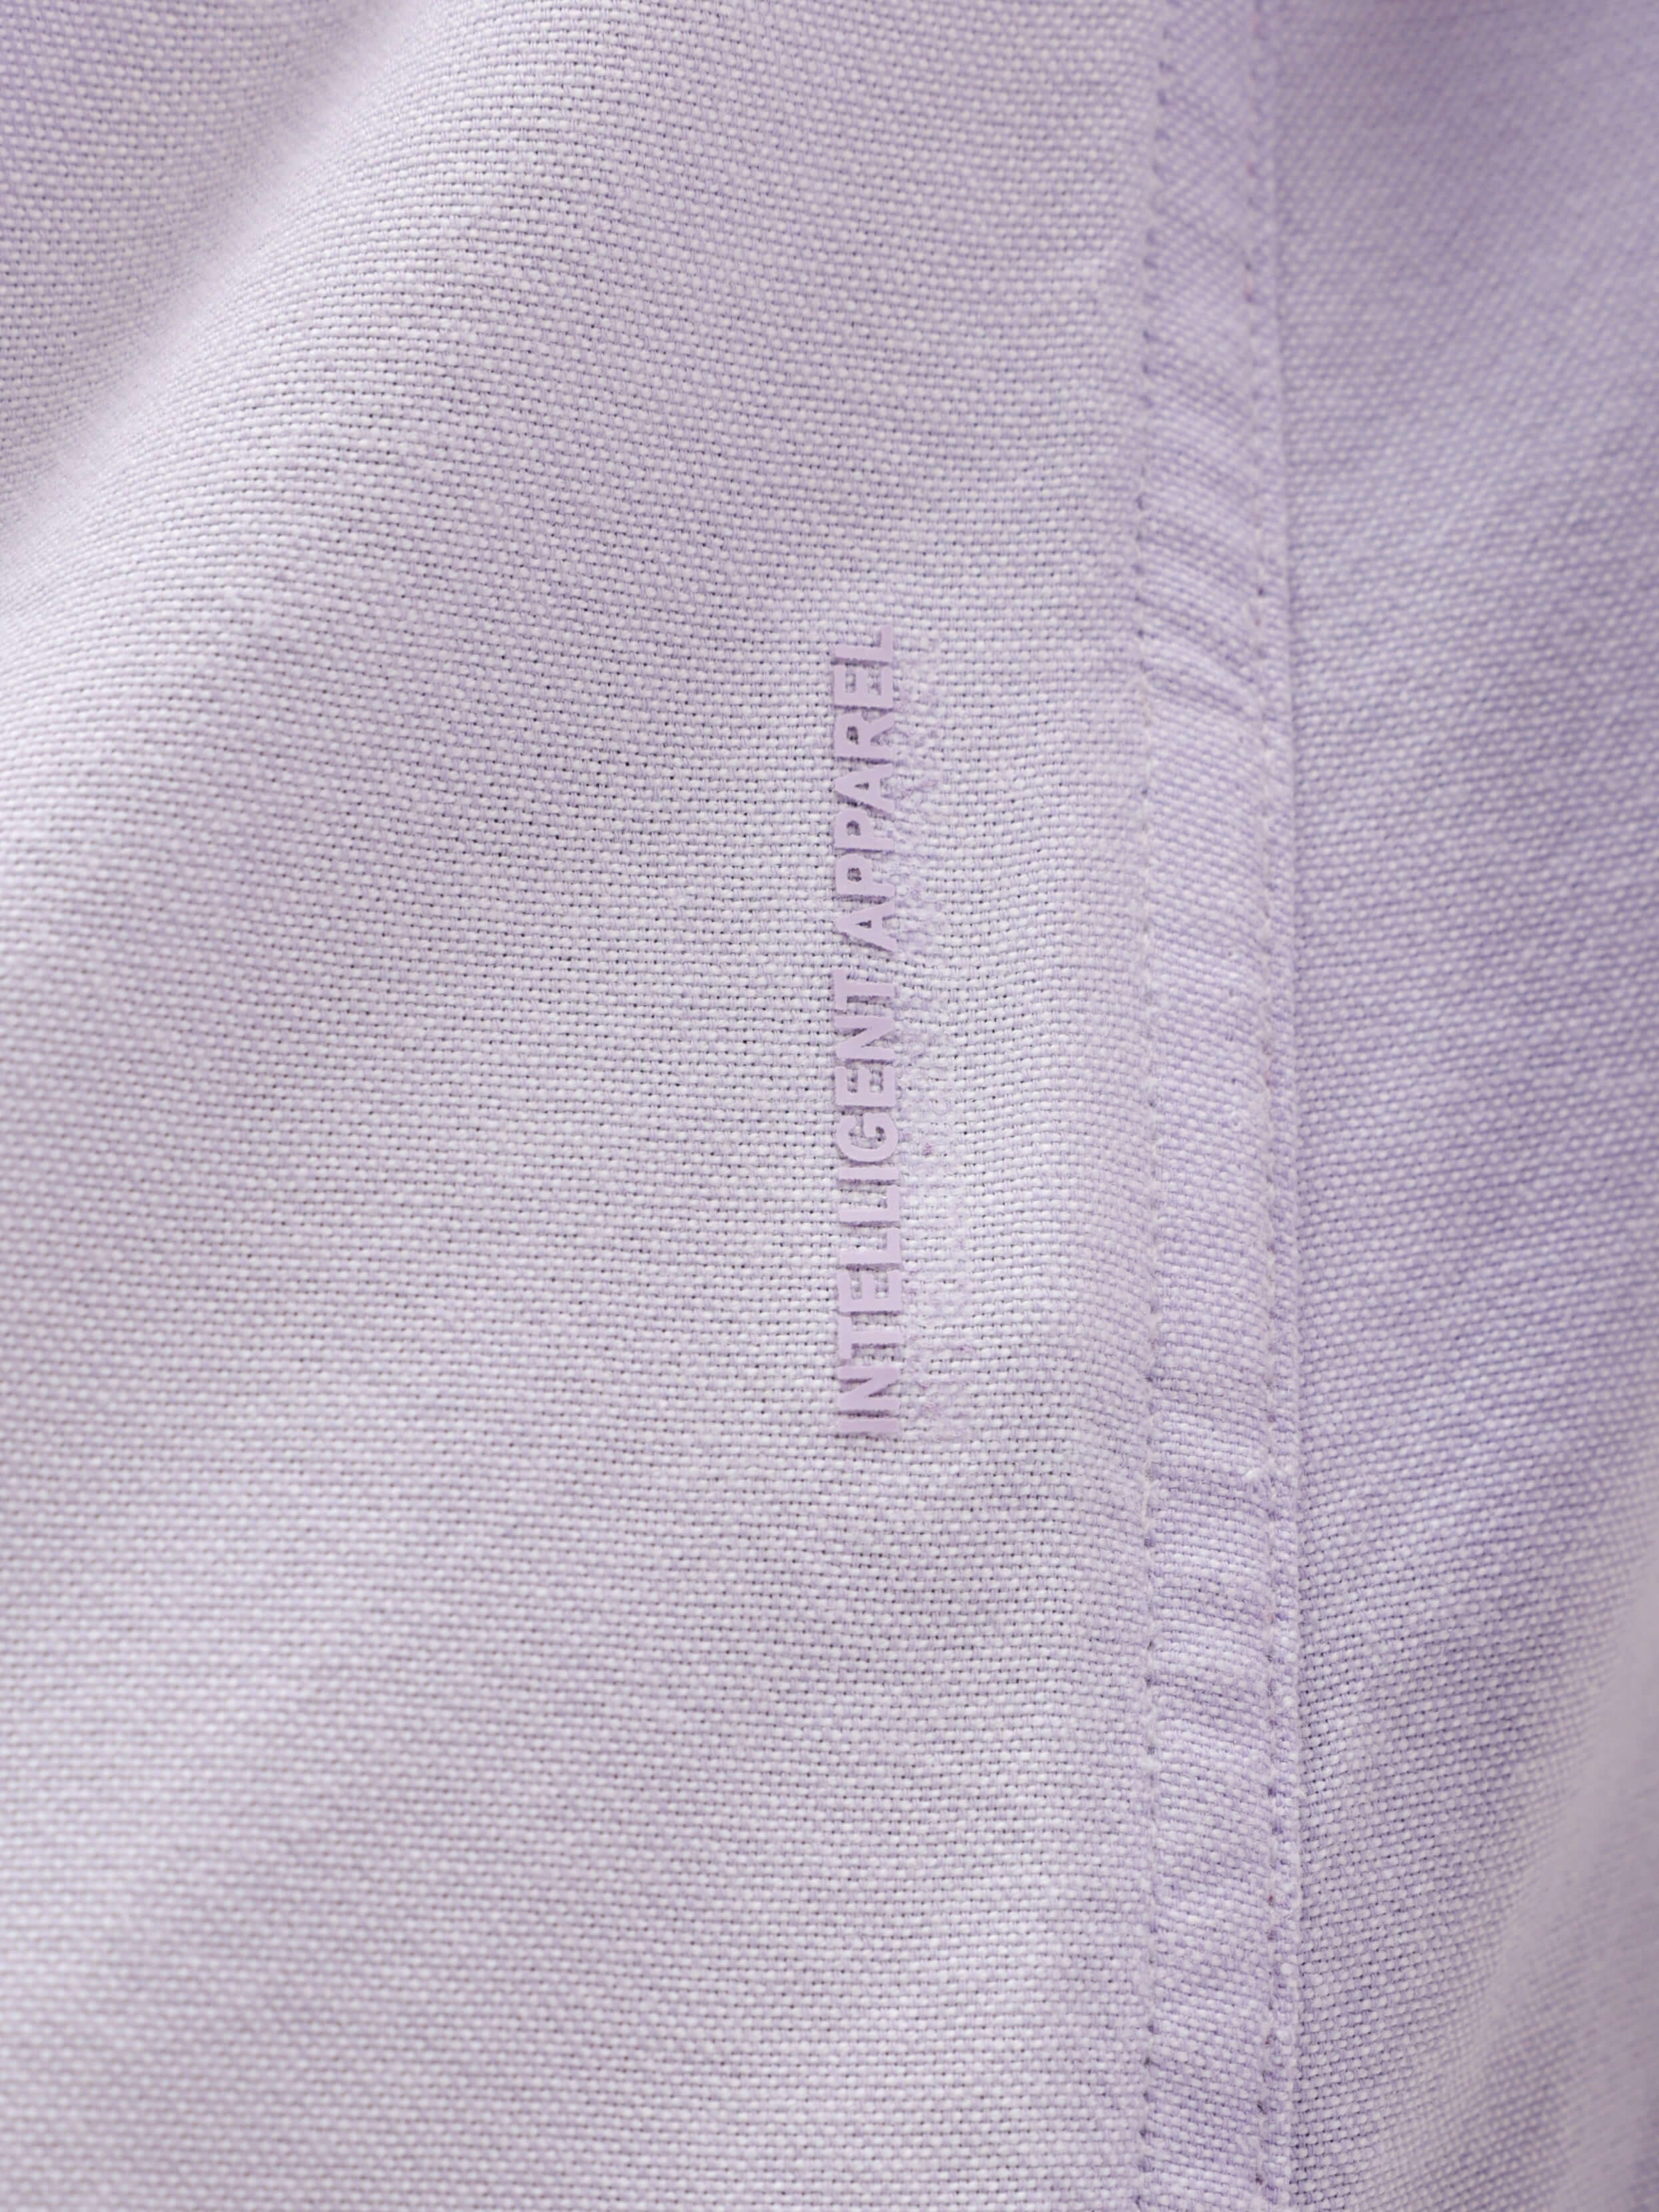 Lavender Haven: Premium Cotton Turms Shirt Experience unmatched elegance with our anti-stain, anti-odour lavender shirt. Made from luxurious combed cotton for lasting quality. INTELLIGENT SHIRTS Rs. 2999.00